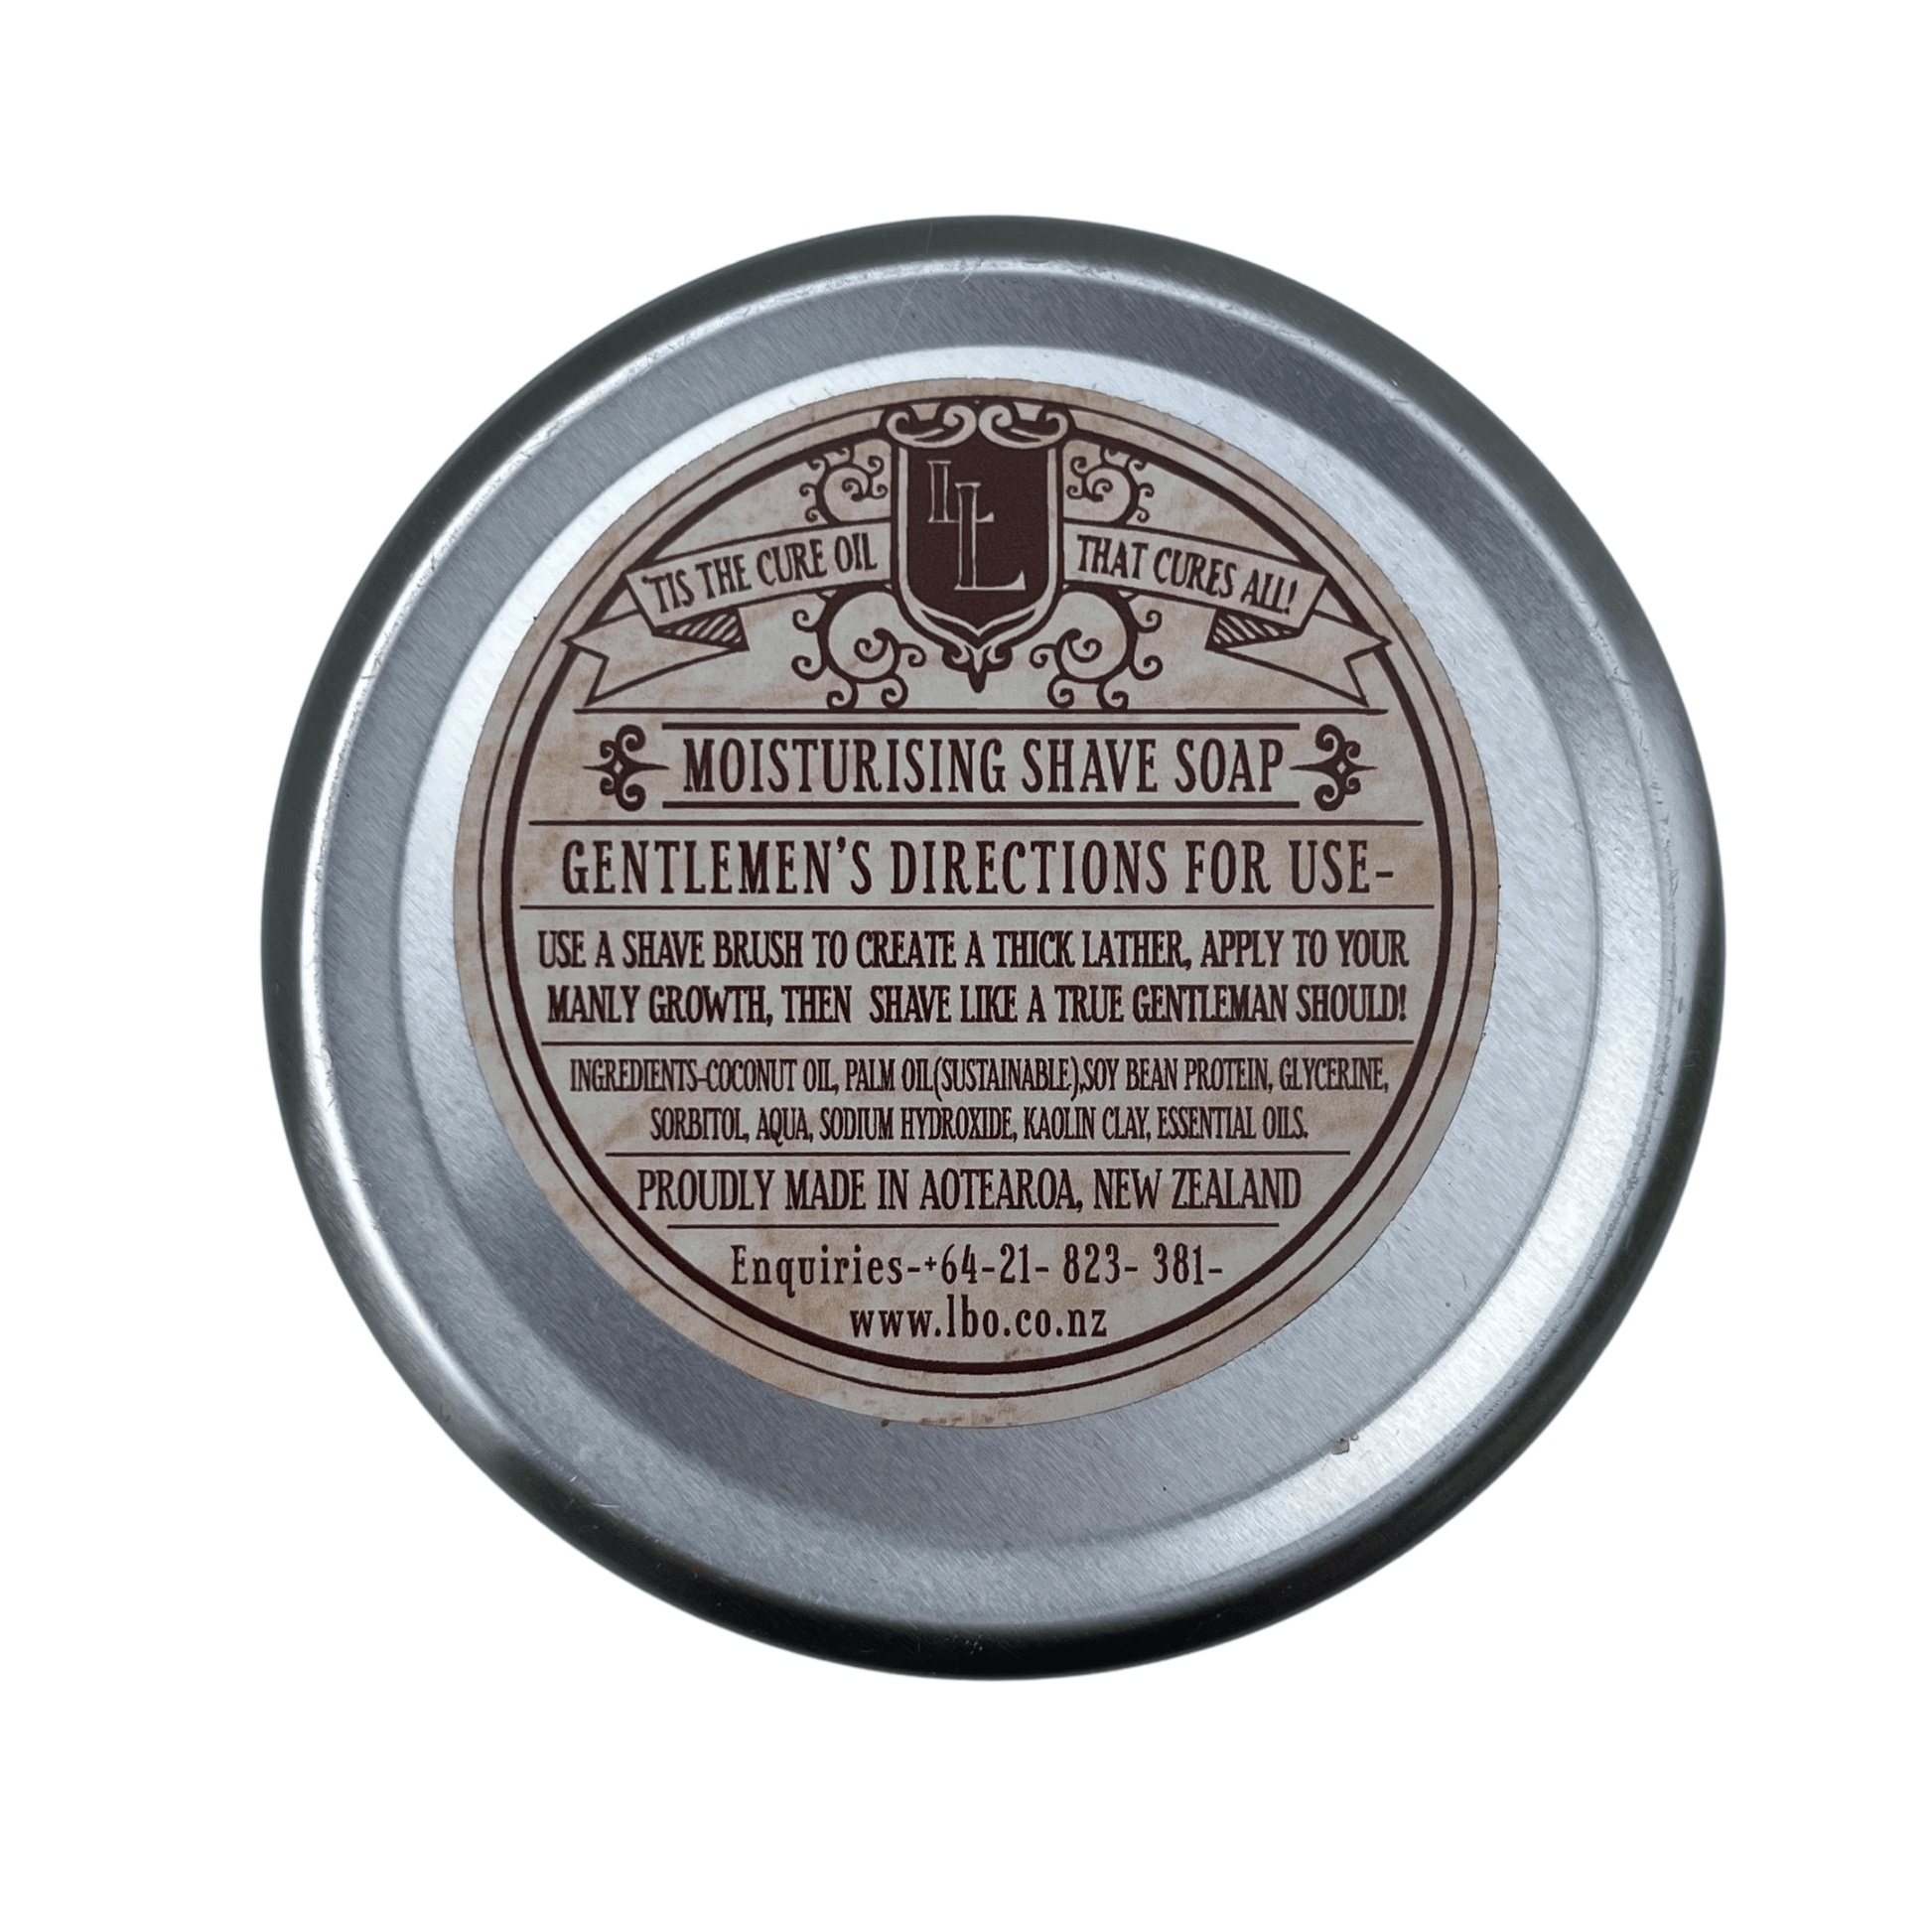 Underside of Metal tin of Lamberts Luscious shaving soap. showing directions for use.